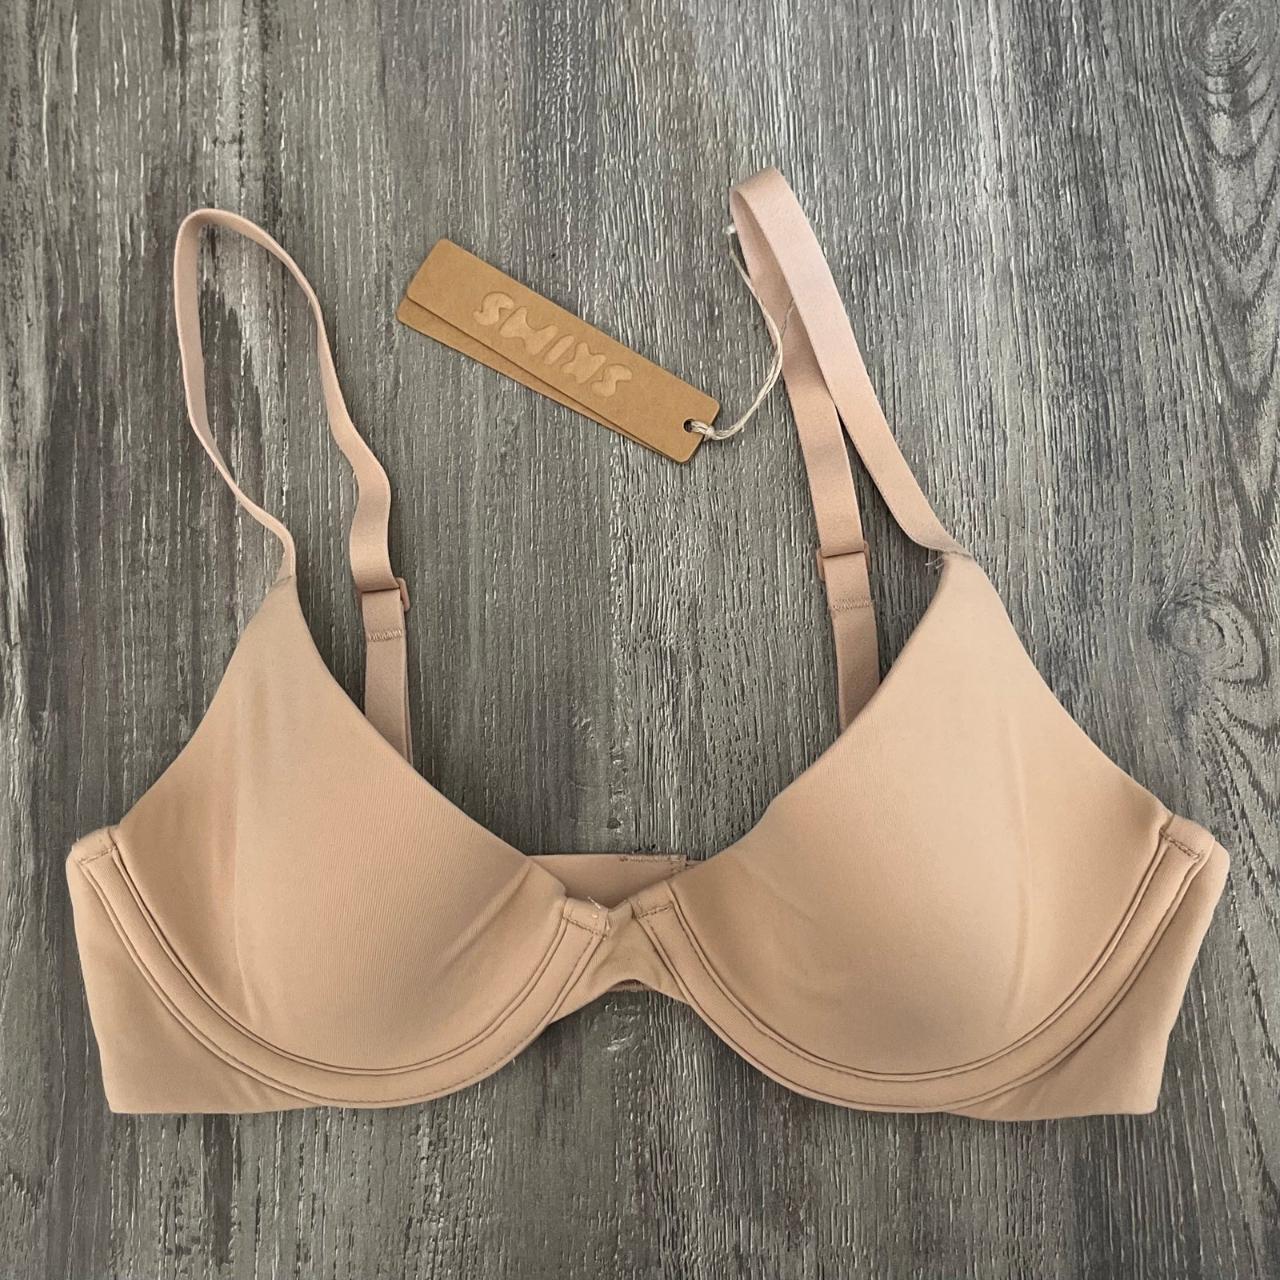 SKIMS NWT Women's Size 44D Clay Brown Fits Everybody T-Shirt Bra